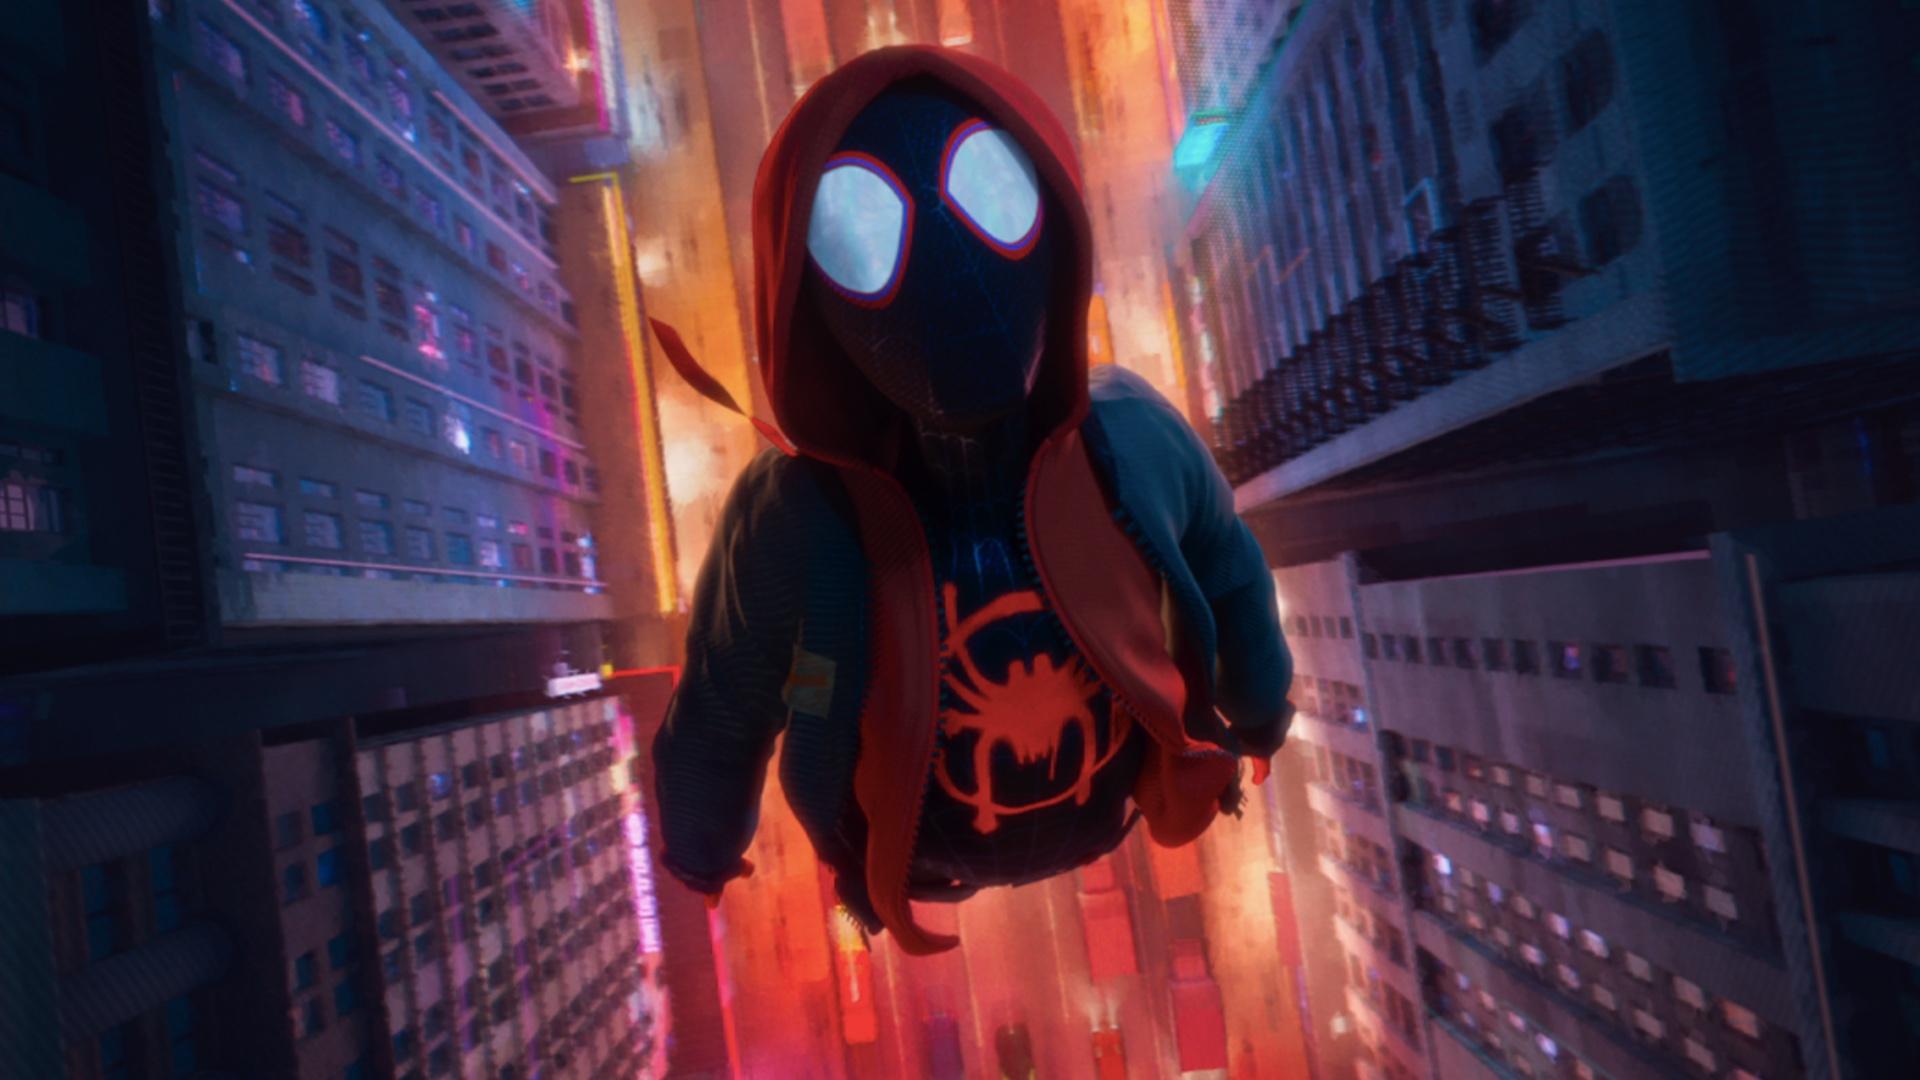 The SPIDER MAN: INTO THE SPIDER VERSE Team Are Hard At Work On